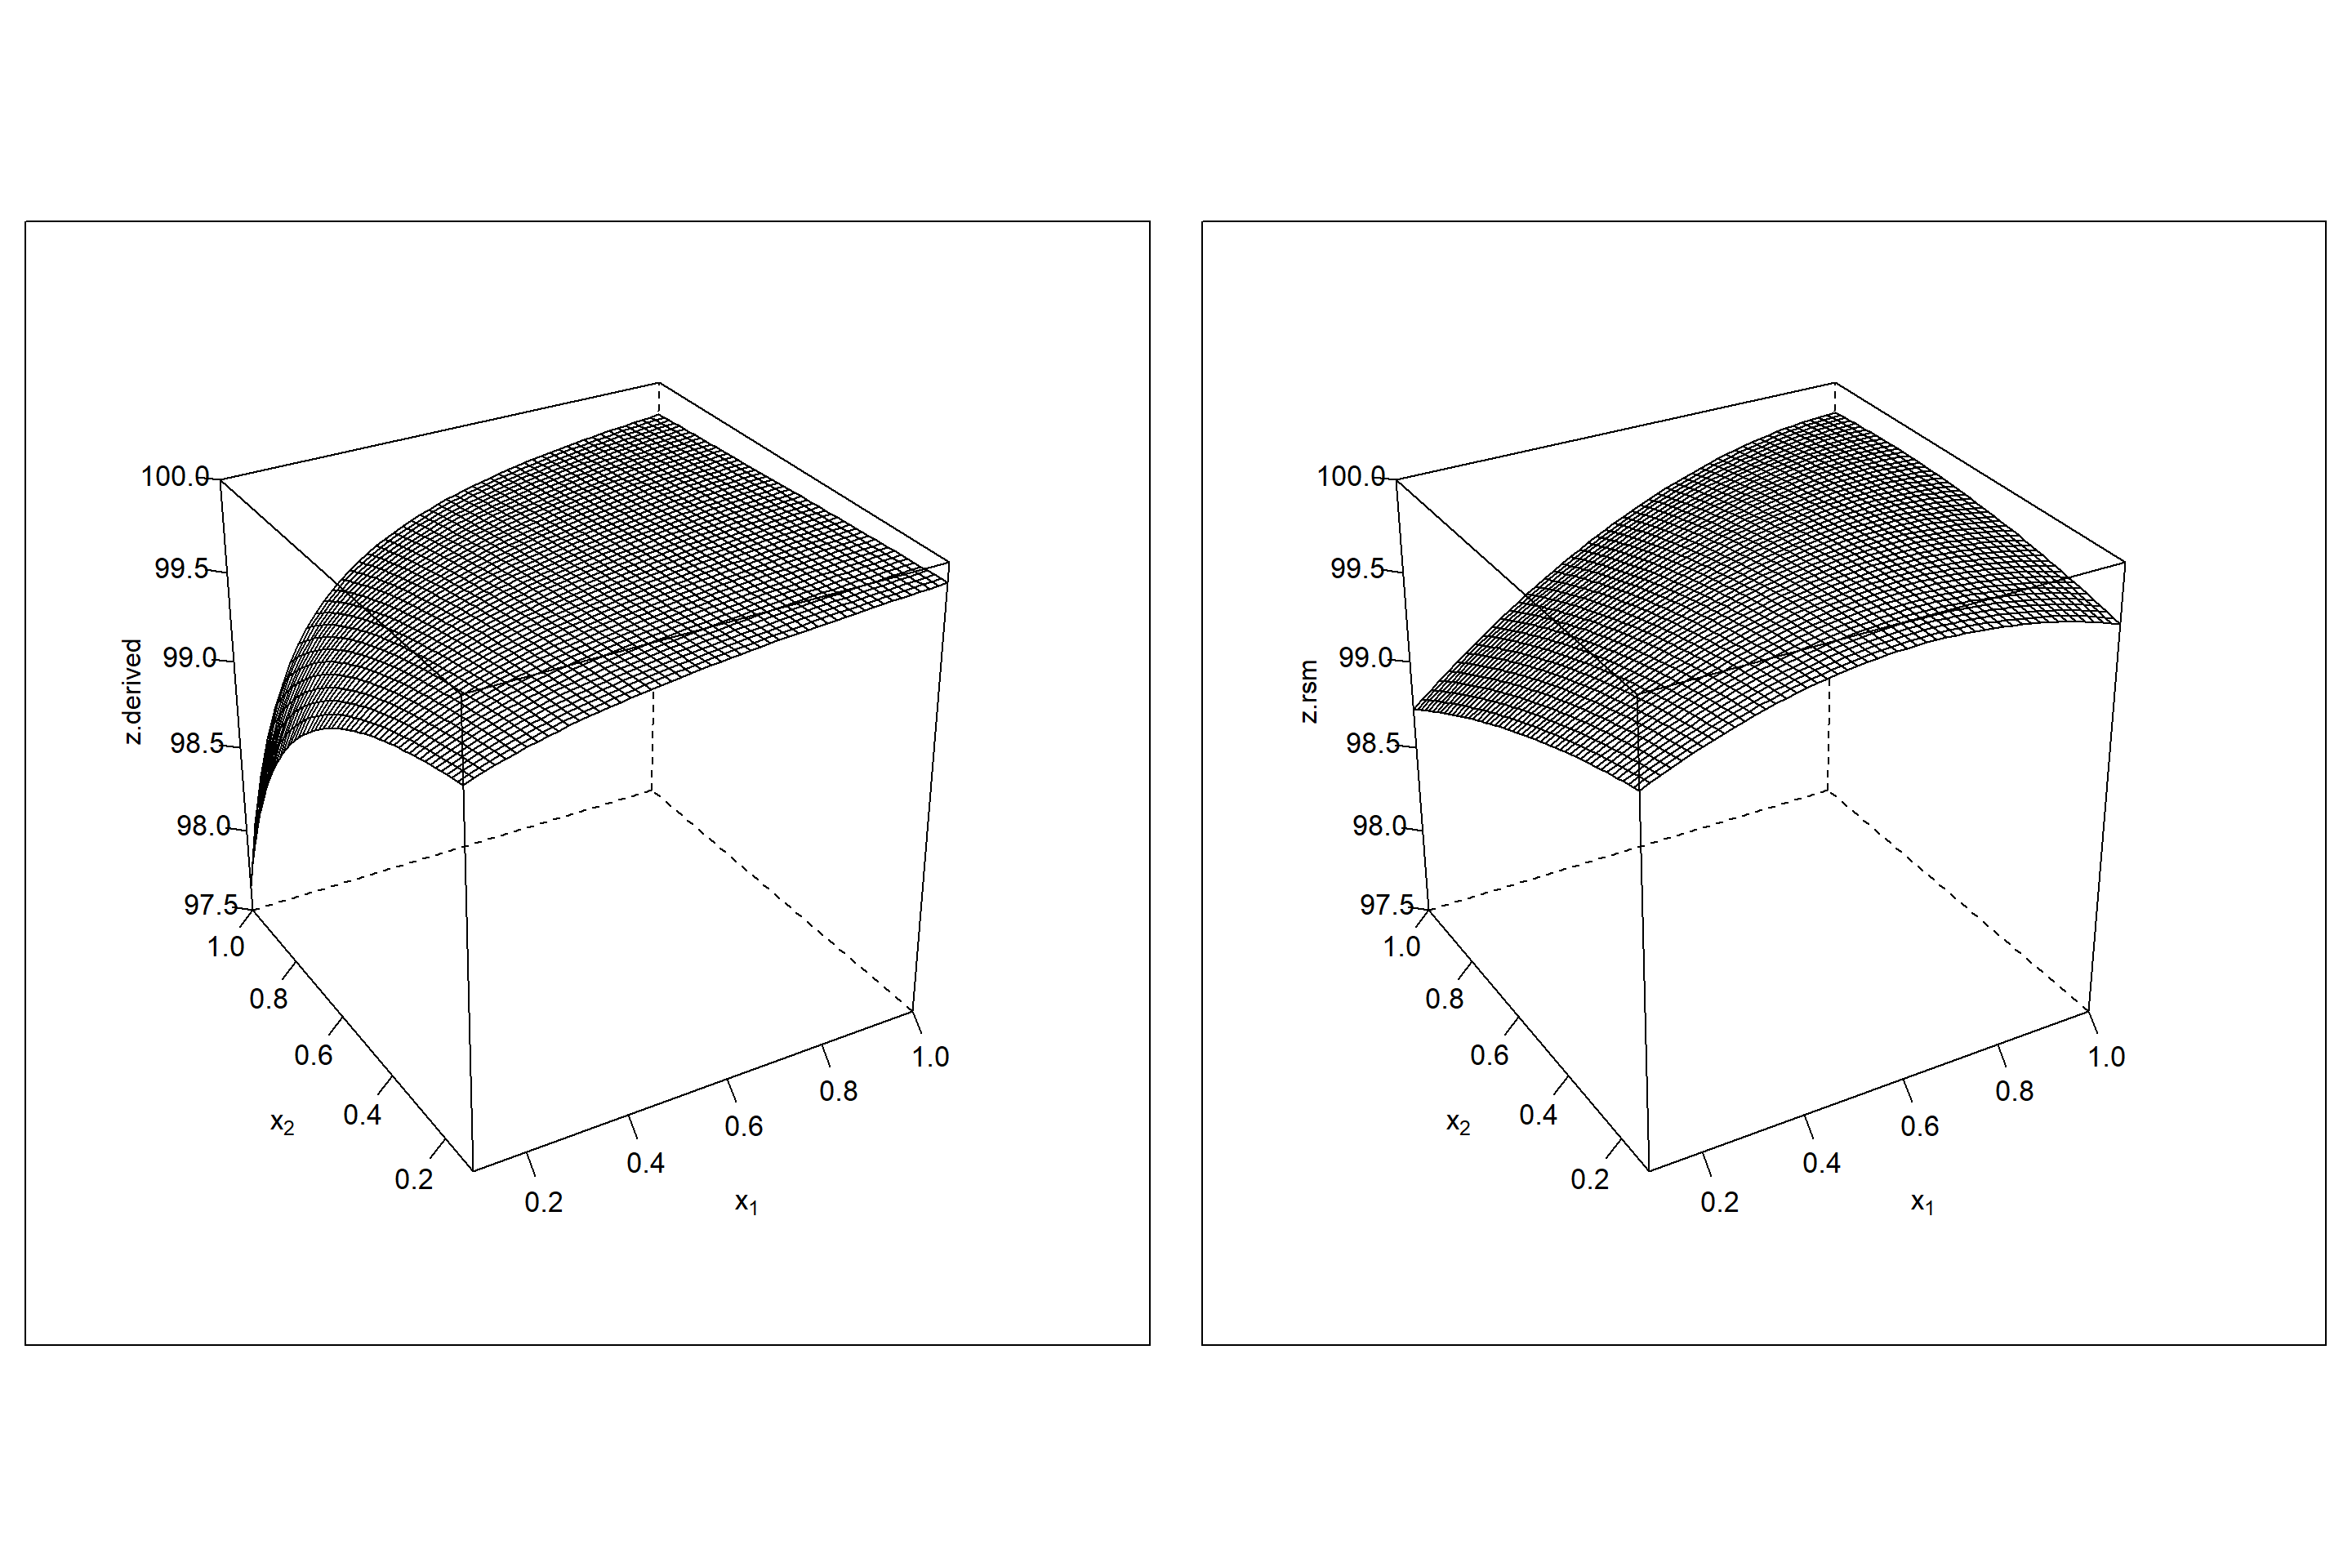 Wireframe plot of $\hat z.derived=100 - \frac{\hat f_{1}}{\hat f_{2}}$ (left panel) and estimated $\hat z.rsm=rsm(100 - \frac{y_{1}}{y_{2}})$ (right panel) as a function of $x_{1},x_{2}$.